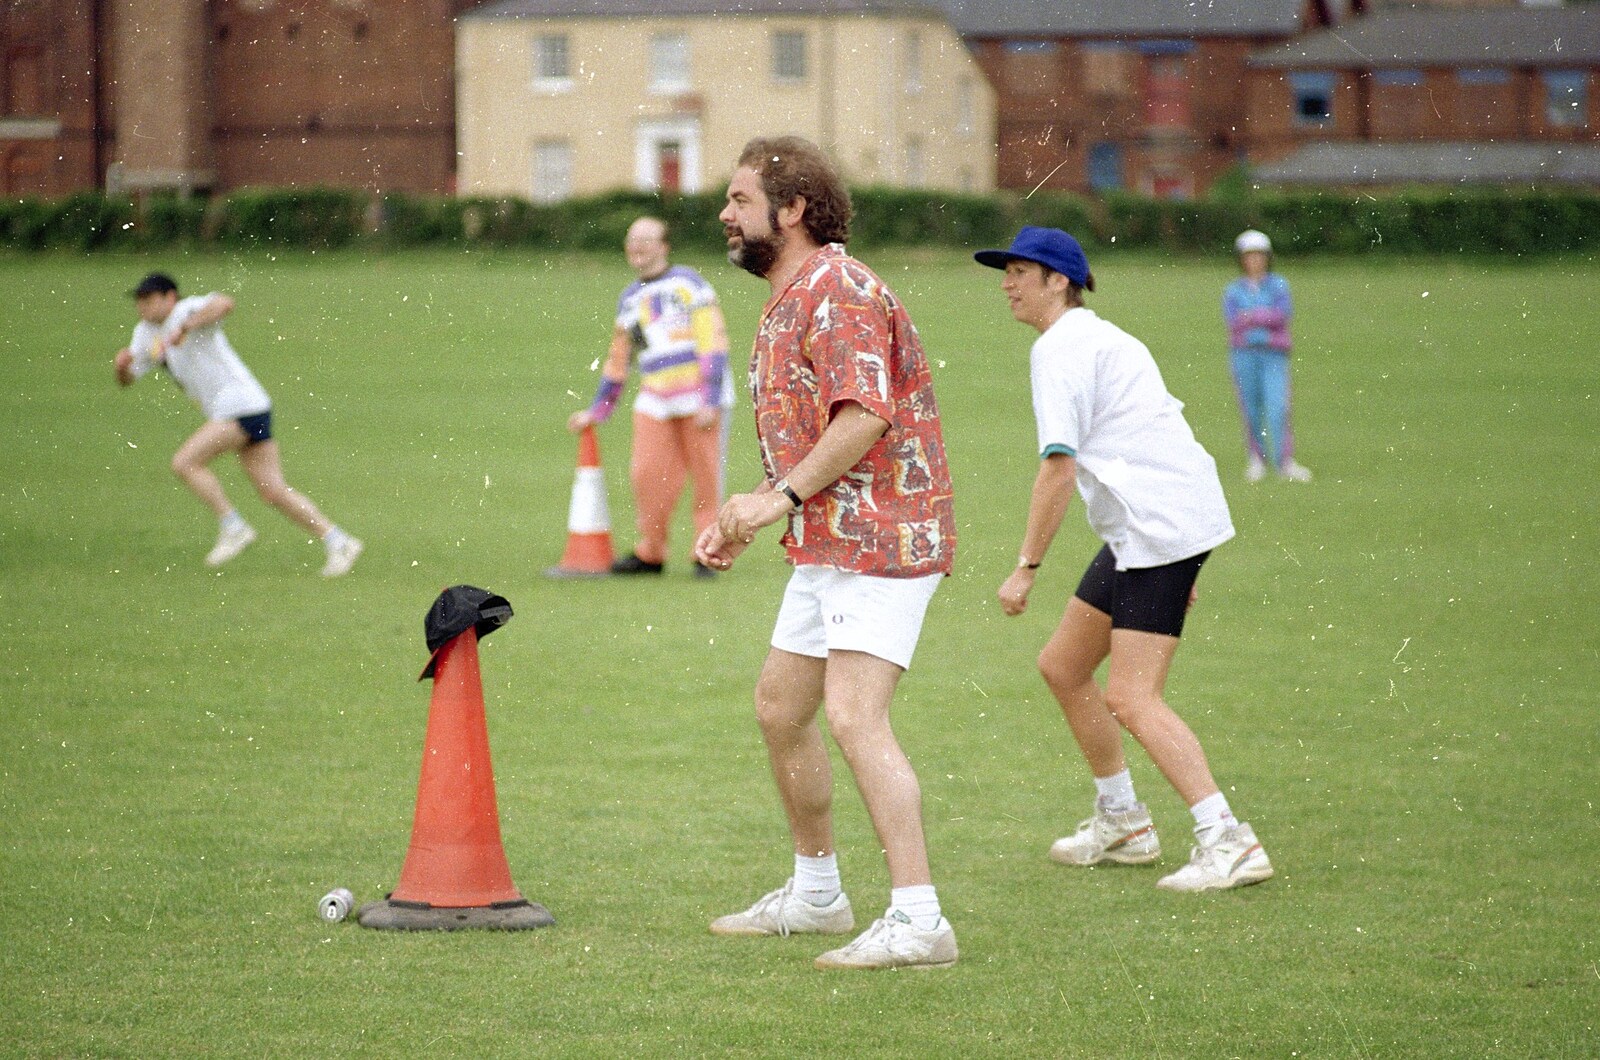 Clays Softball and Printec Reunion, Ditchingham and Stoke Ash, Suffolk - 2nd June 1994: Gary does some fielding